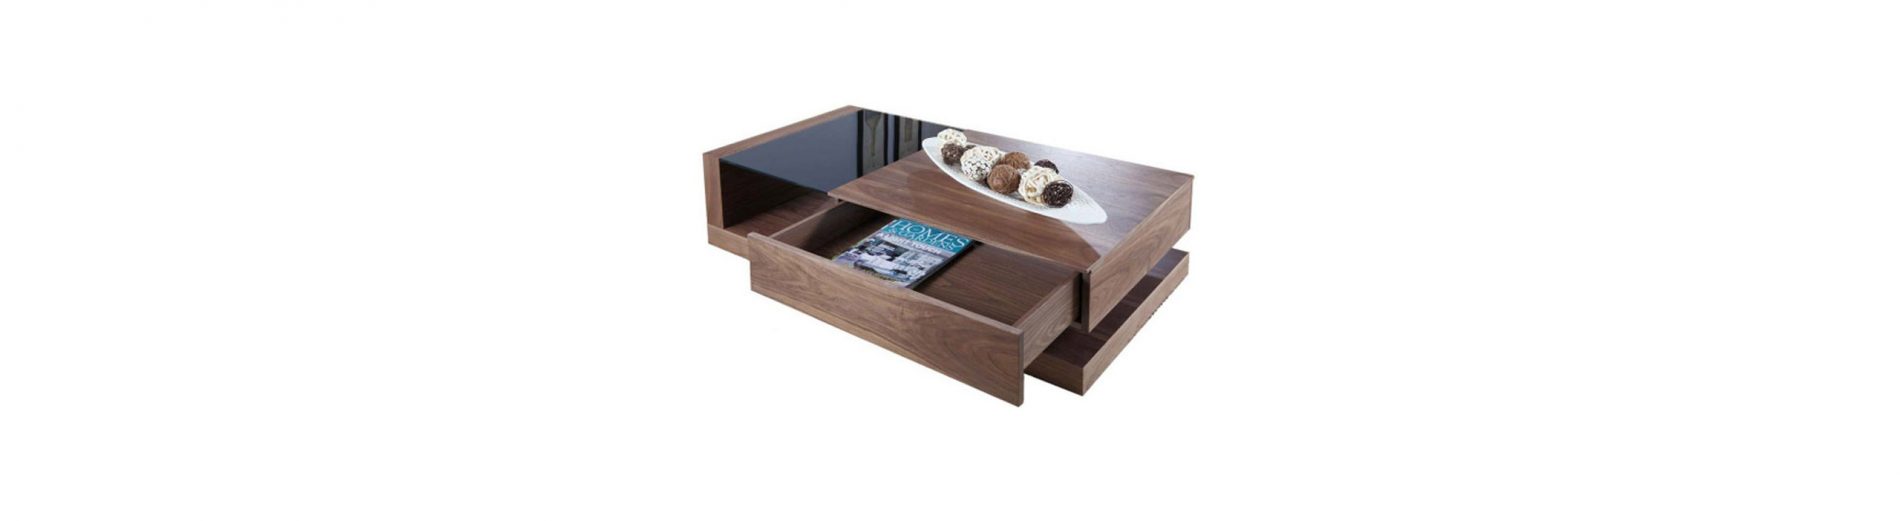 10 Of The Best Wood And Glass Coffee Tables From Furniture in Fashion